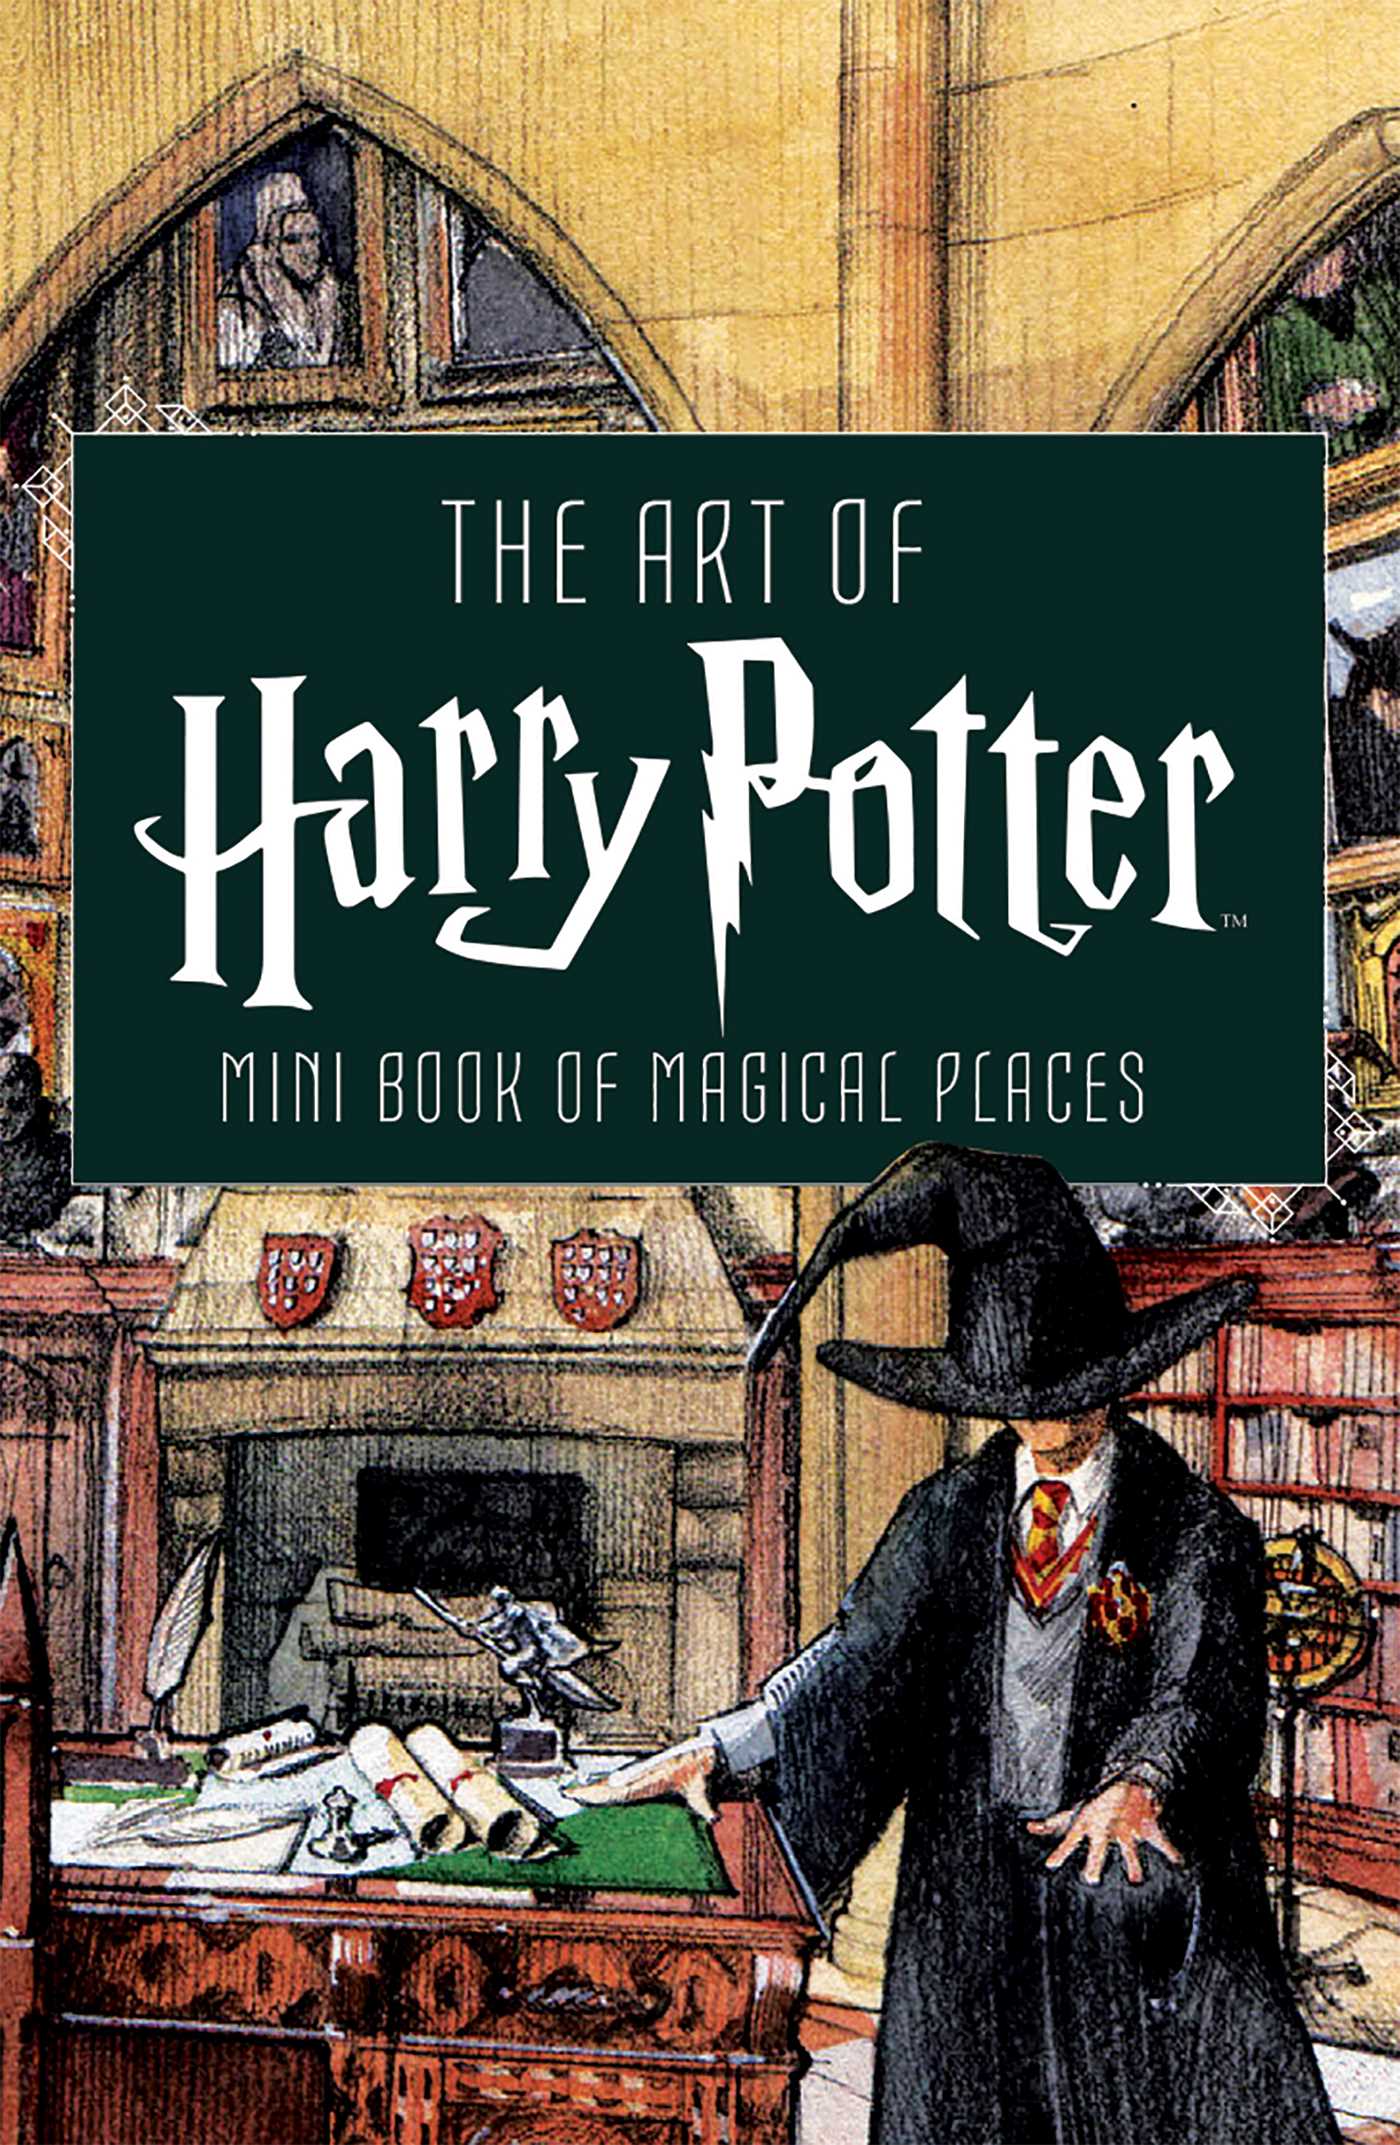 The Art of Harry Potter (Mini Book) : Mini Book of Magical Places | Insight Editions